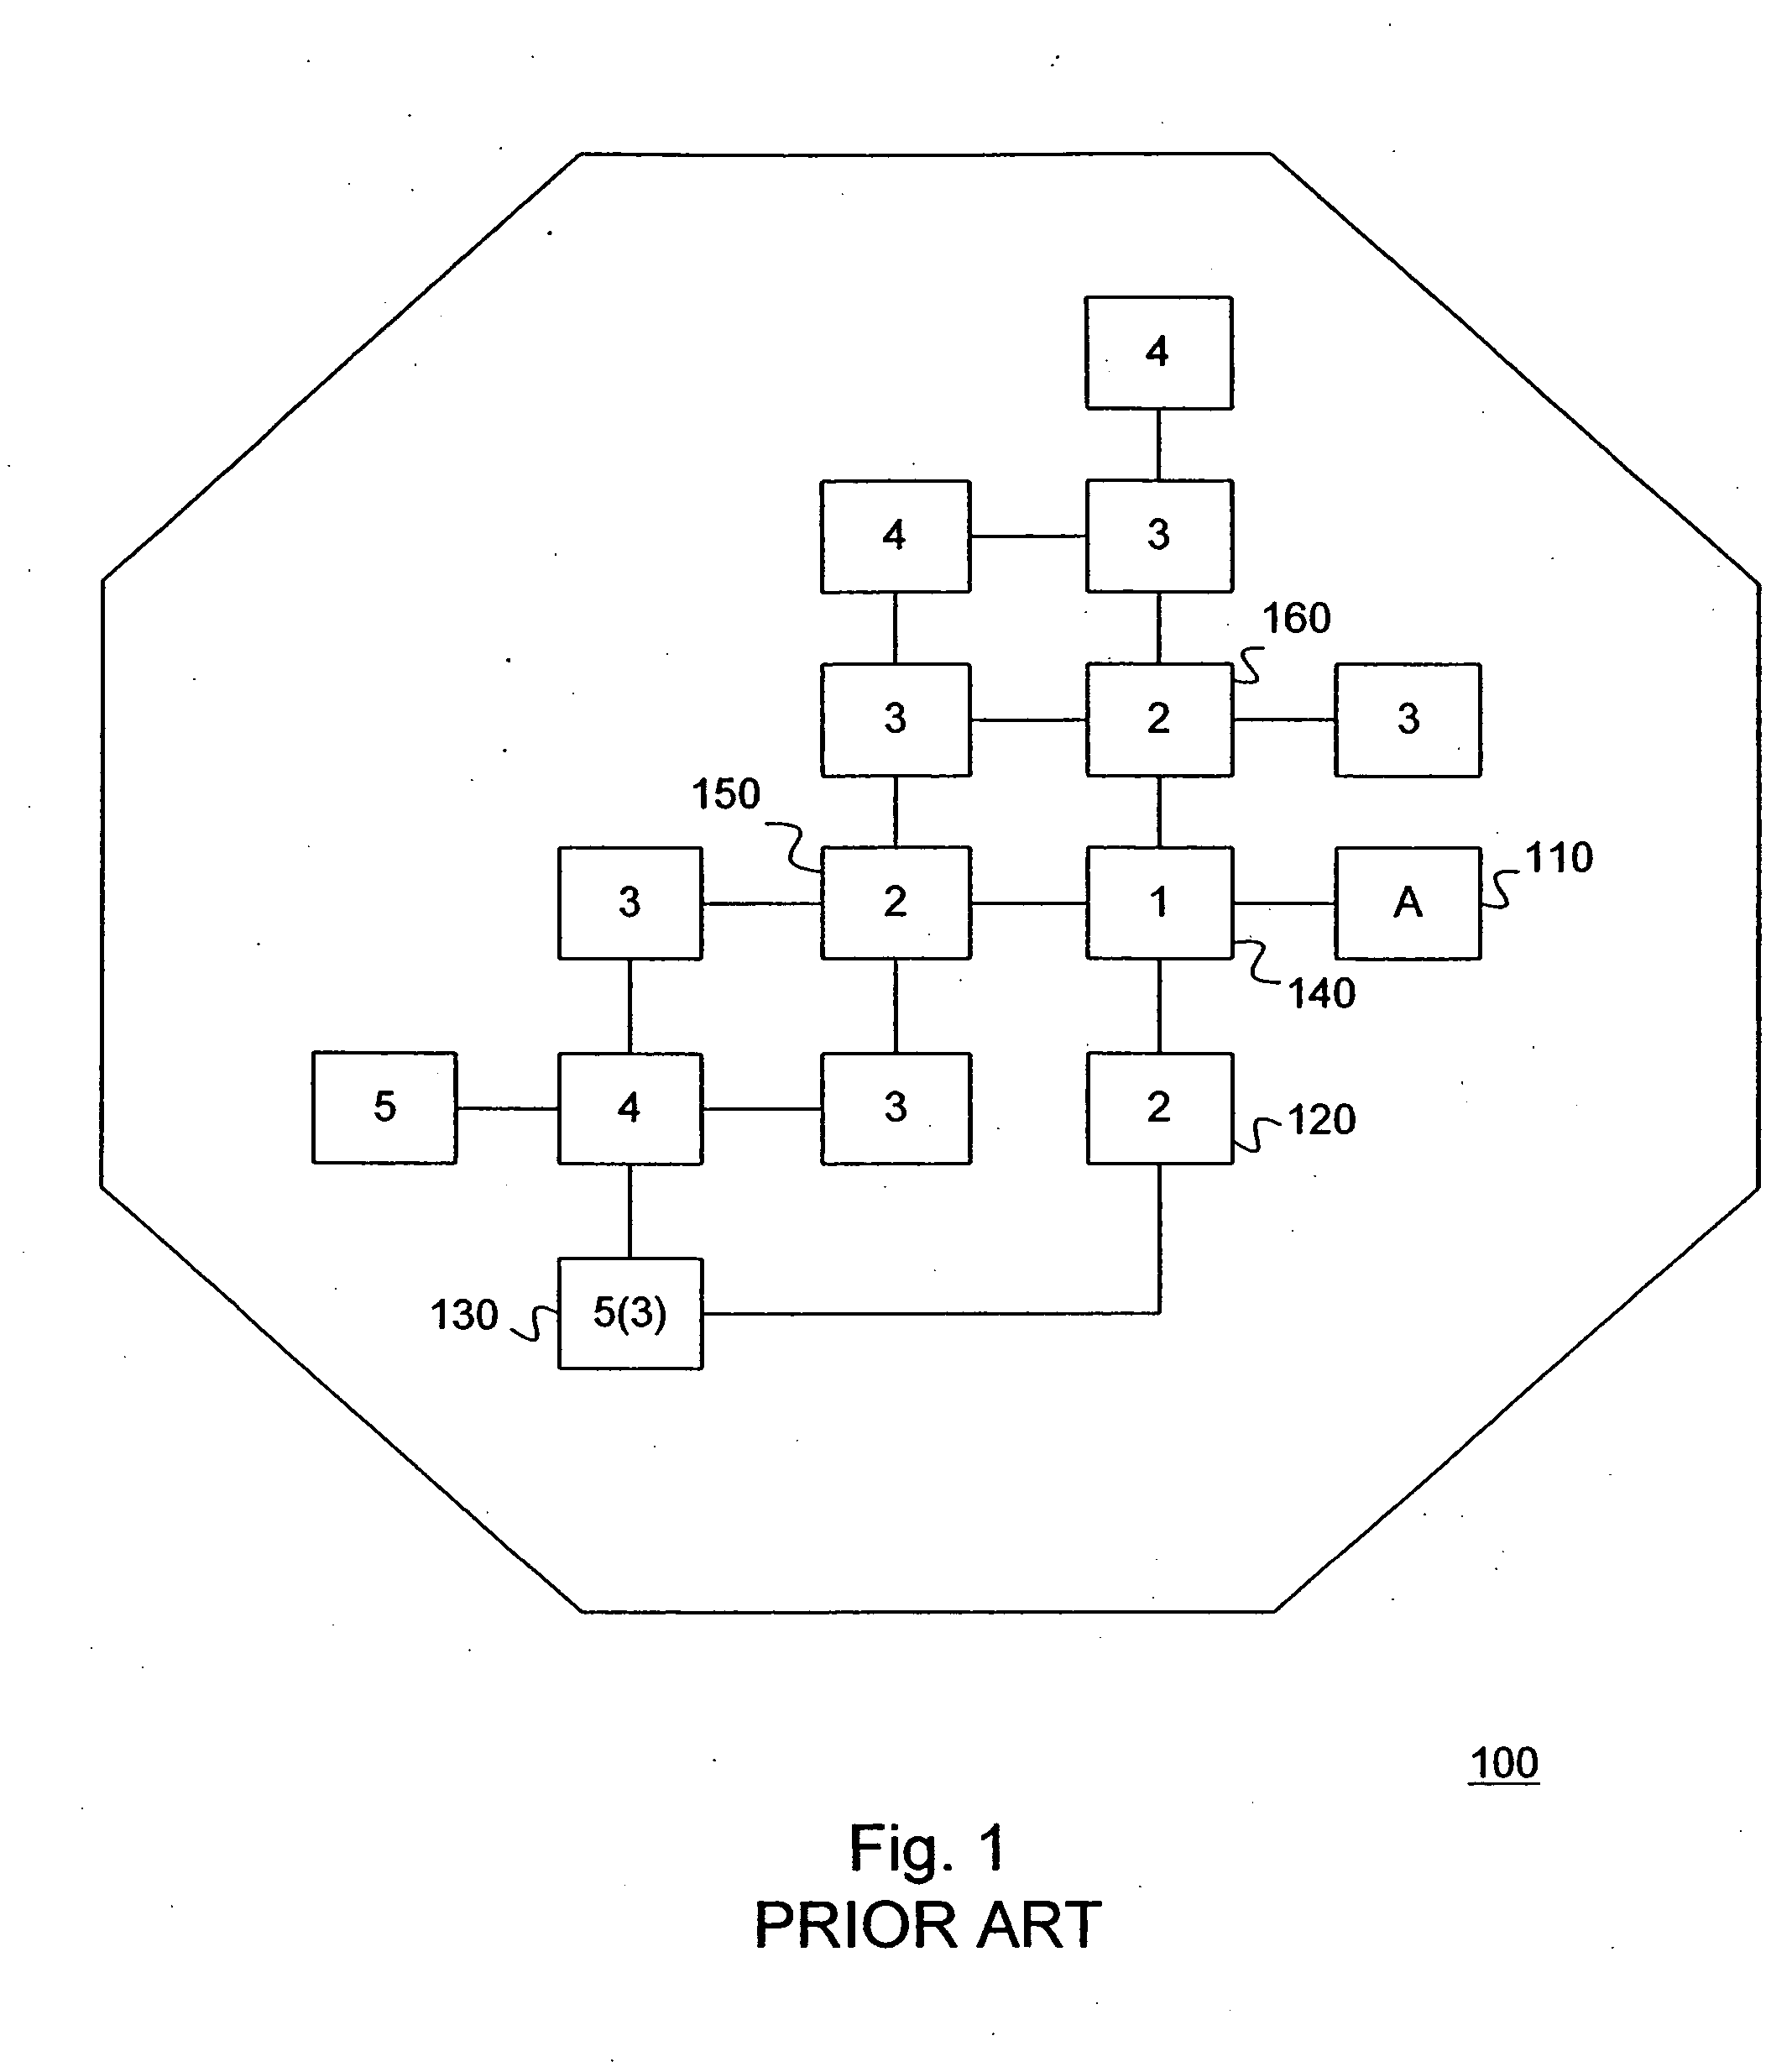 System and method for searching peer-to-peer computer networks